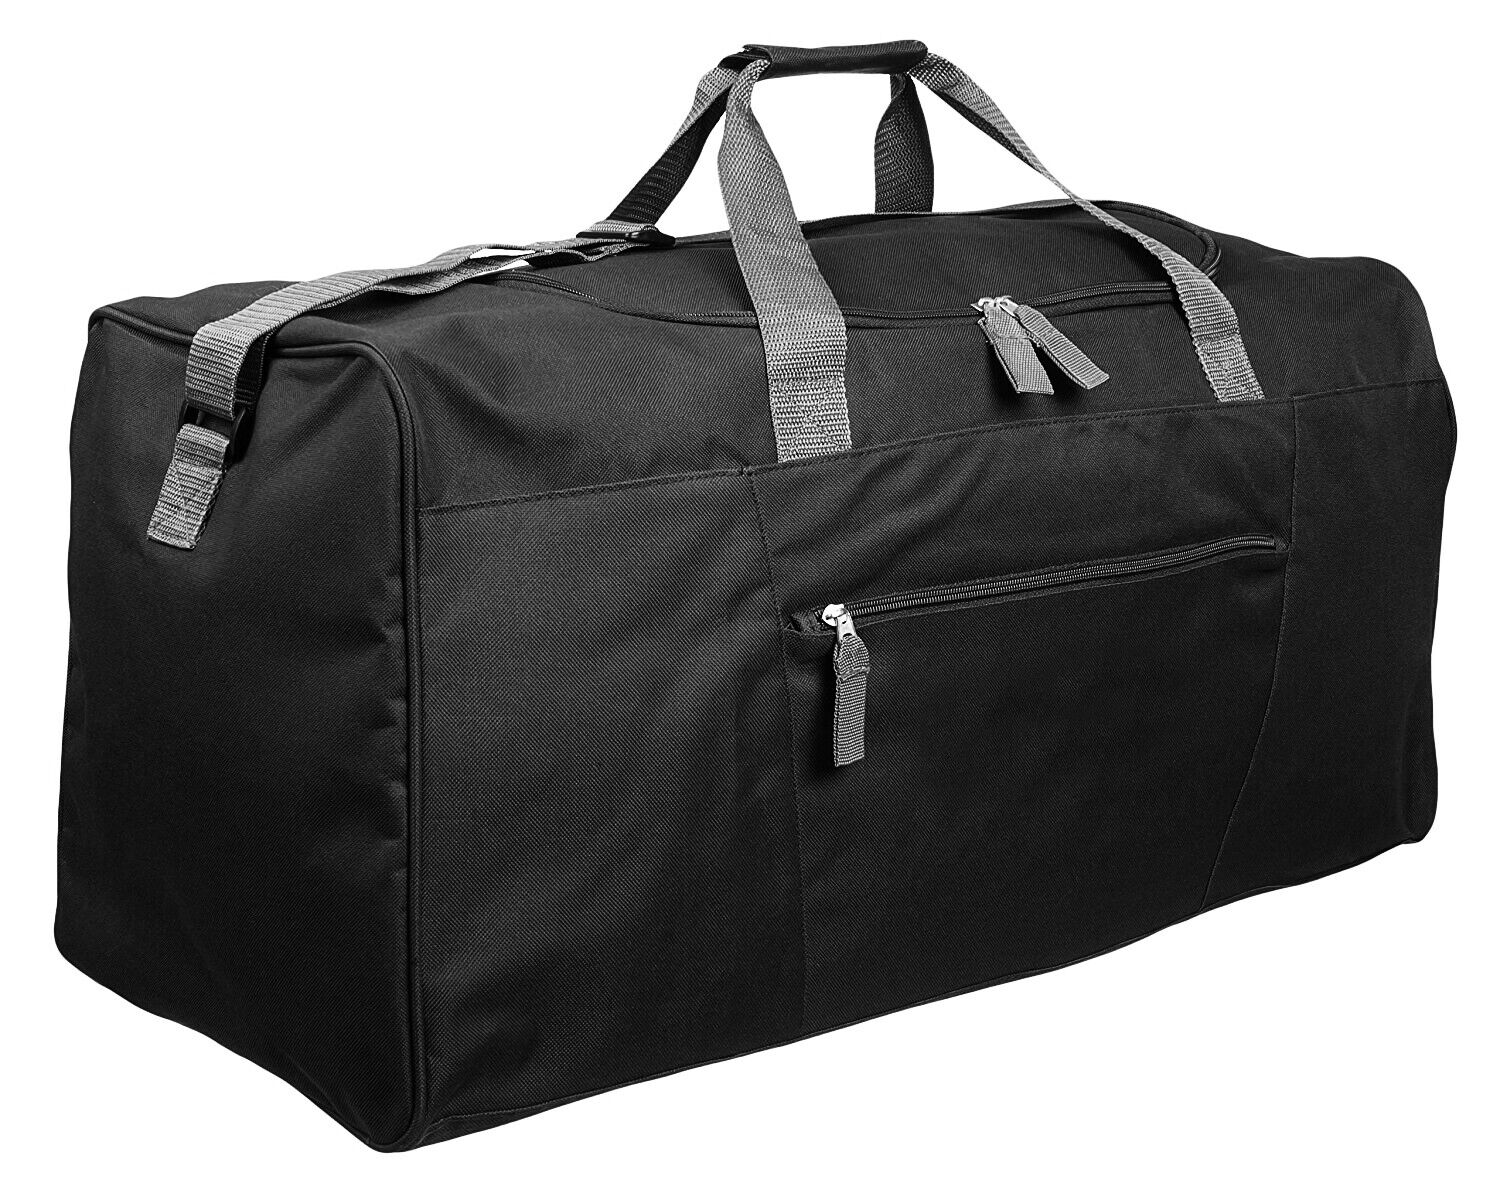 Mens XL Size Sports & Travel Duffle Bags - TRAVEL SPORT HOLDALL EXTRA LARGE BAG